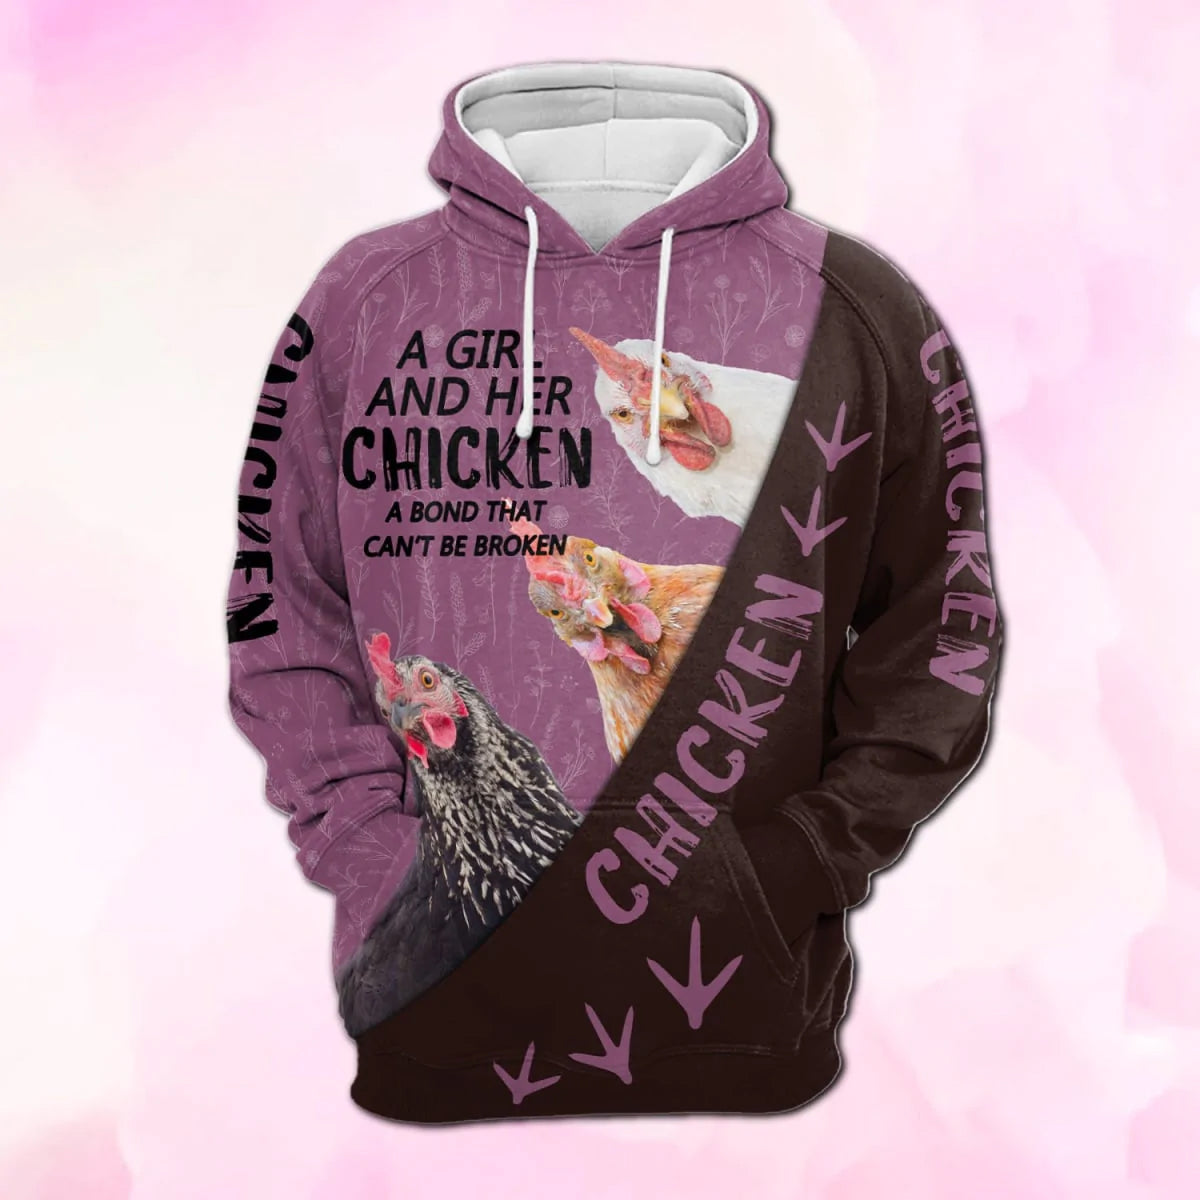 Cute Chicken Women Hoodie 3D All Over Print/ Girl And Her Chicken A Bond Can